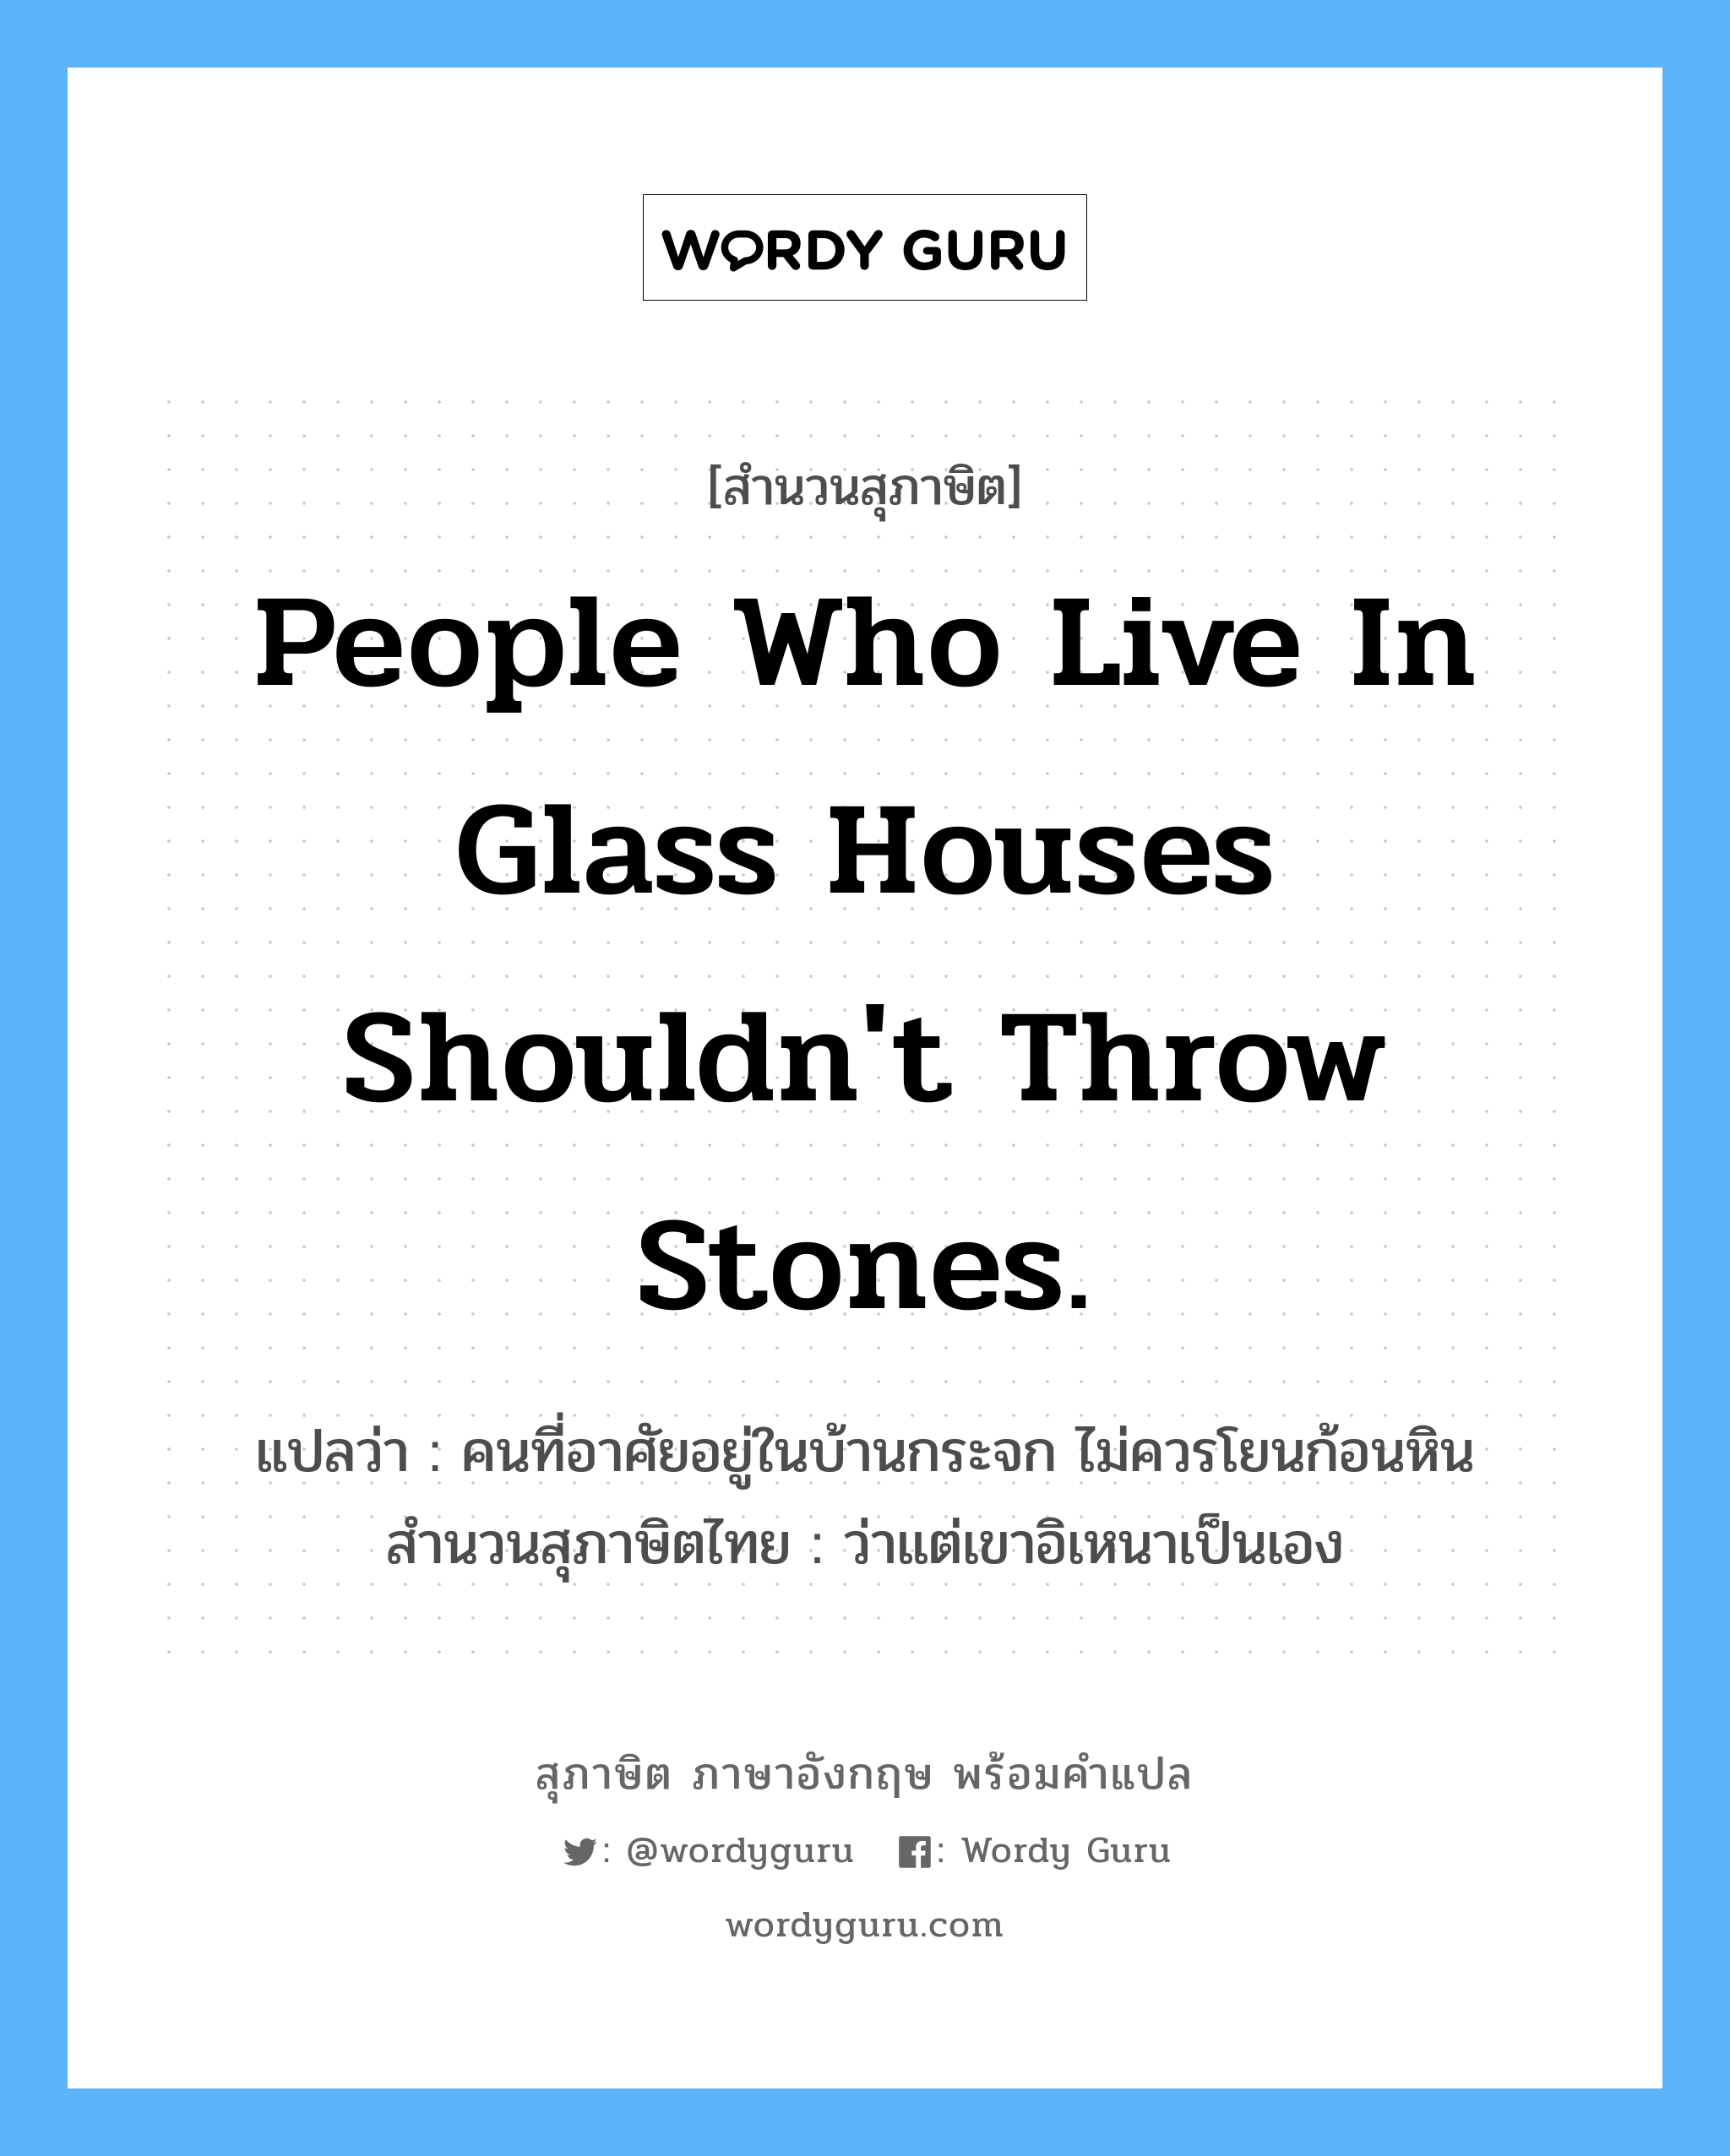 People who live in glass houses shouldn't throw stones.